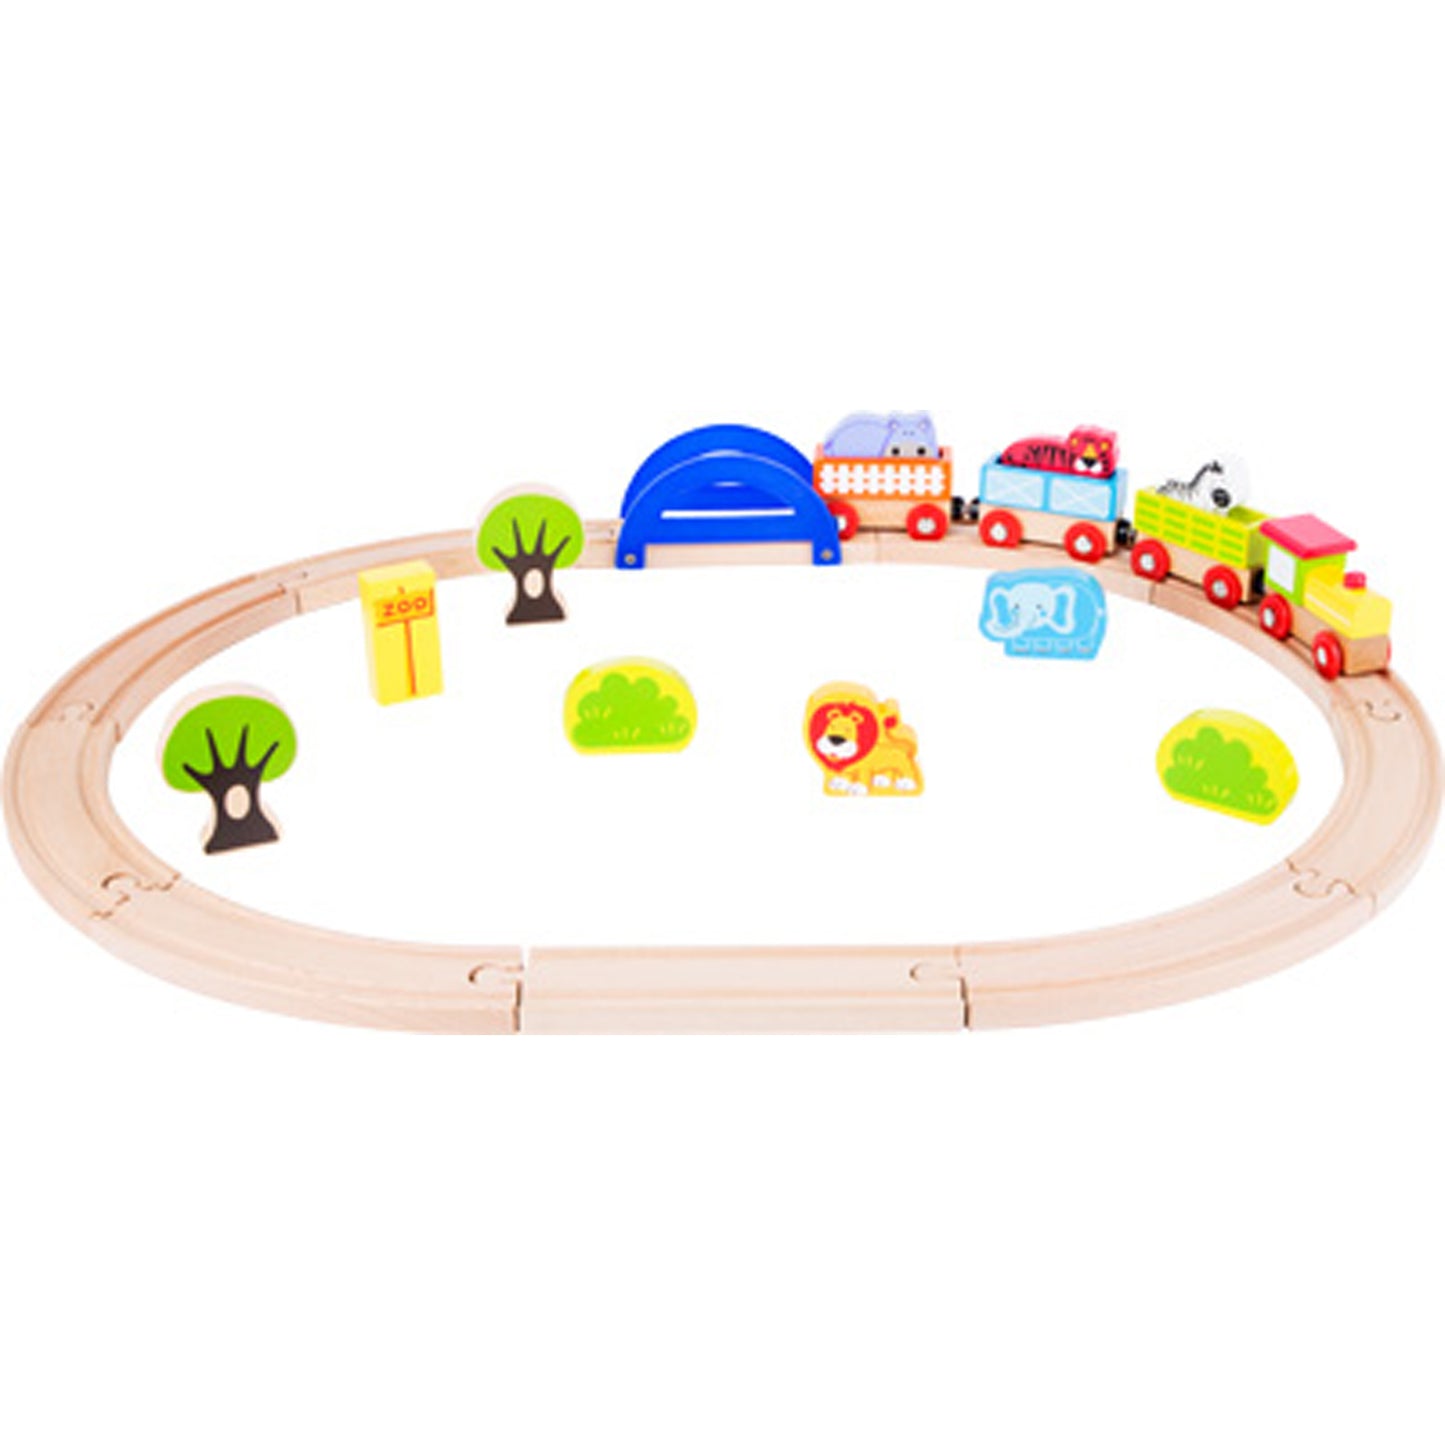 Wooden Toy Train - My Zoo